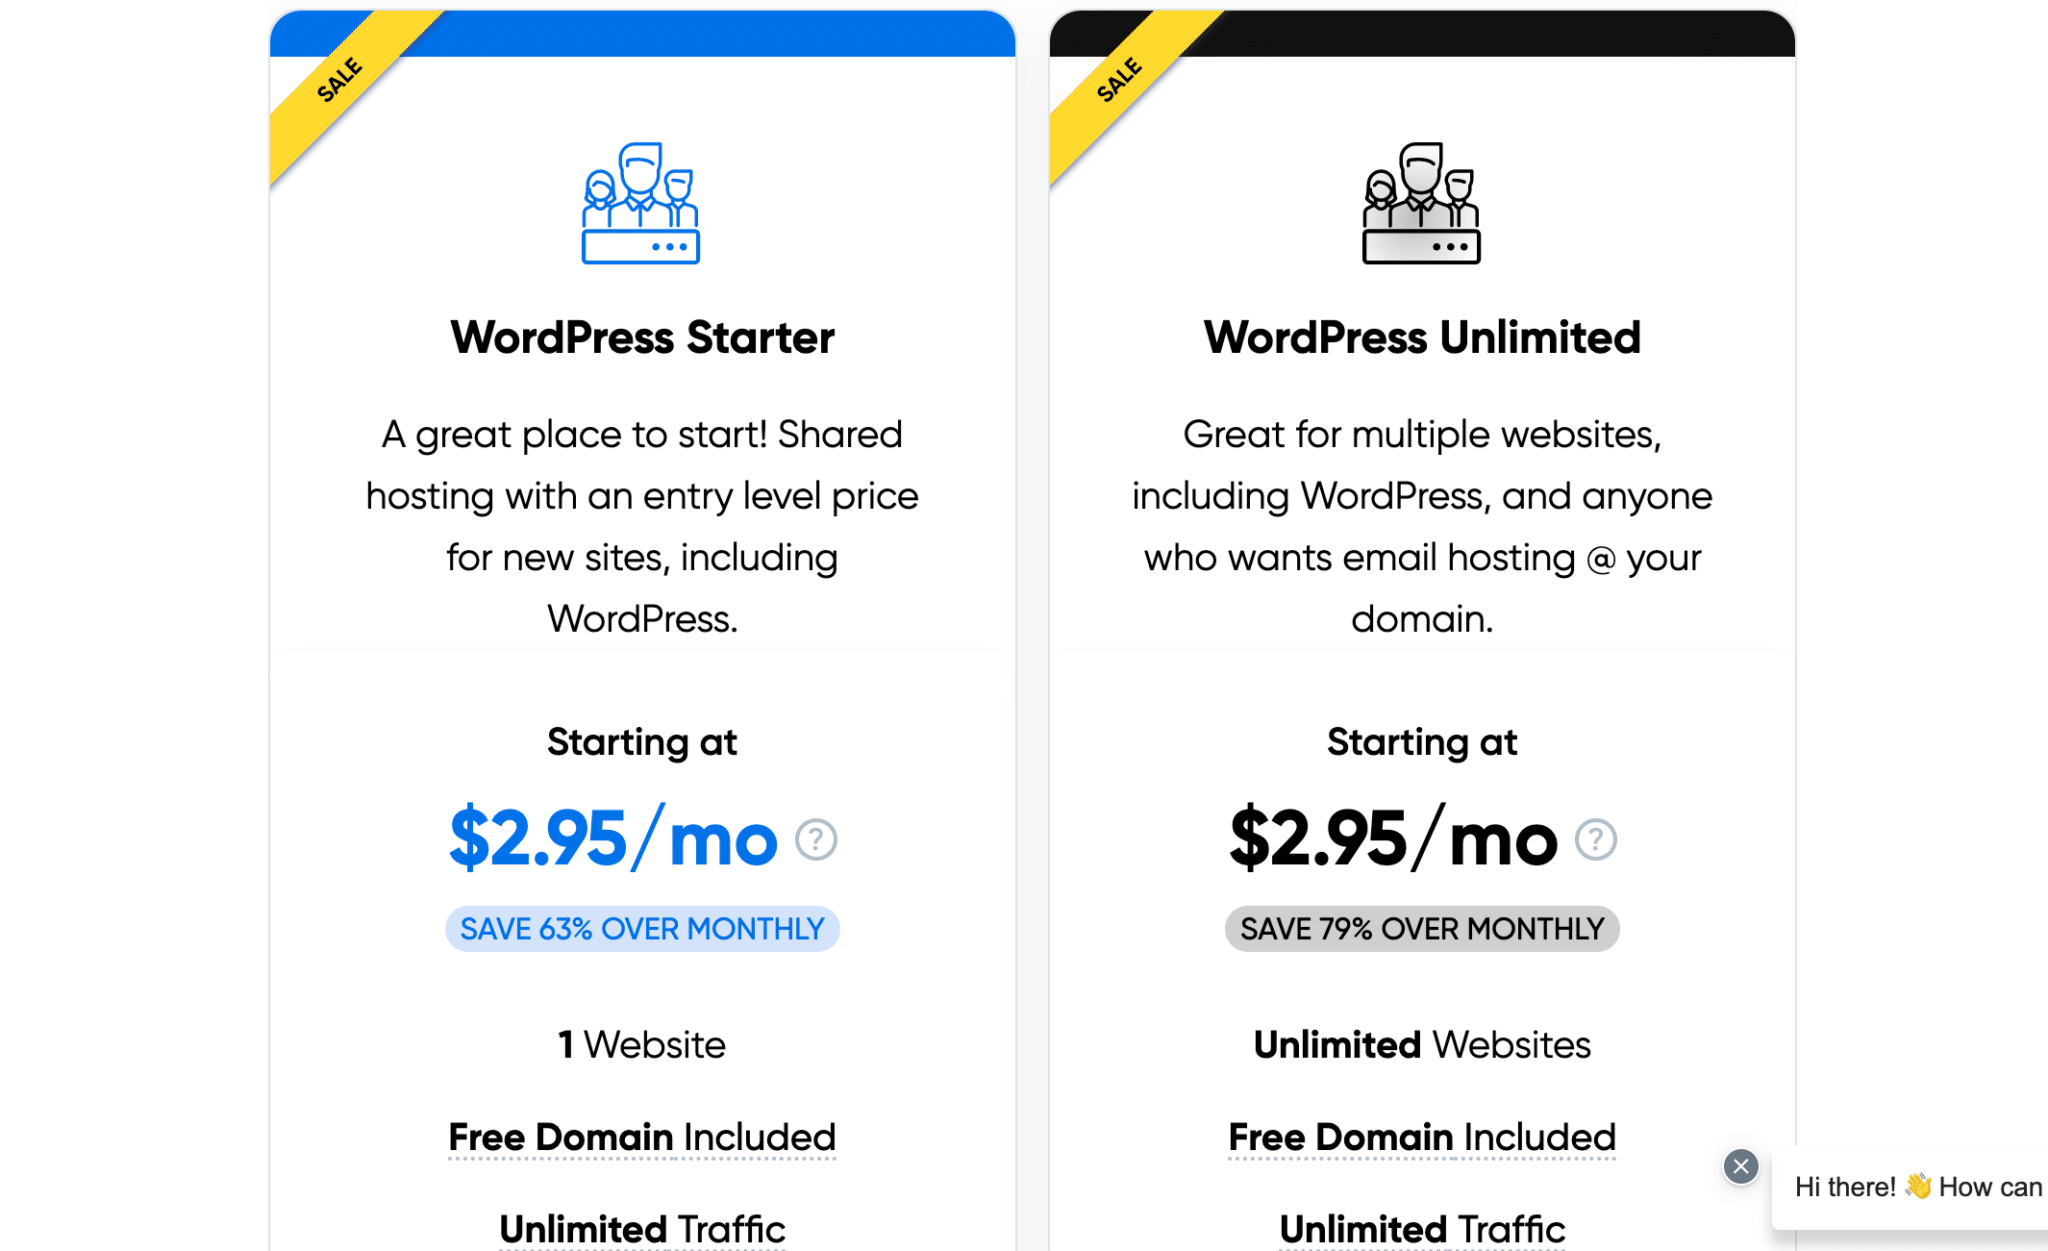 Bluehost vs Dreamhost; Dreamhost WP pricing